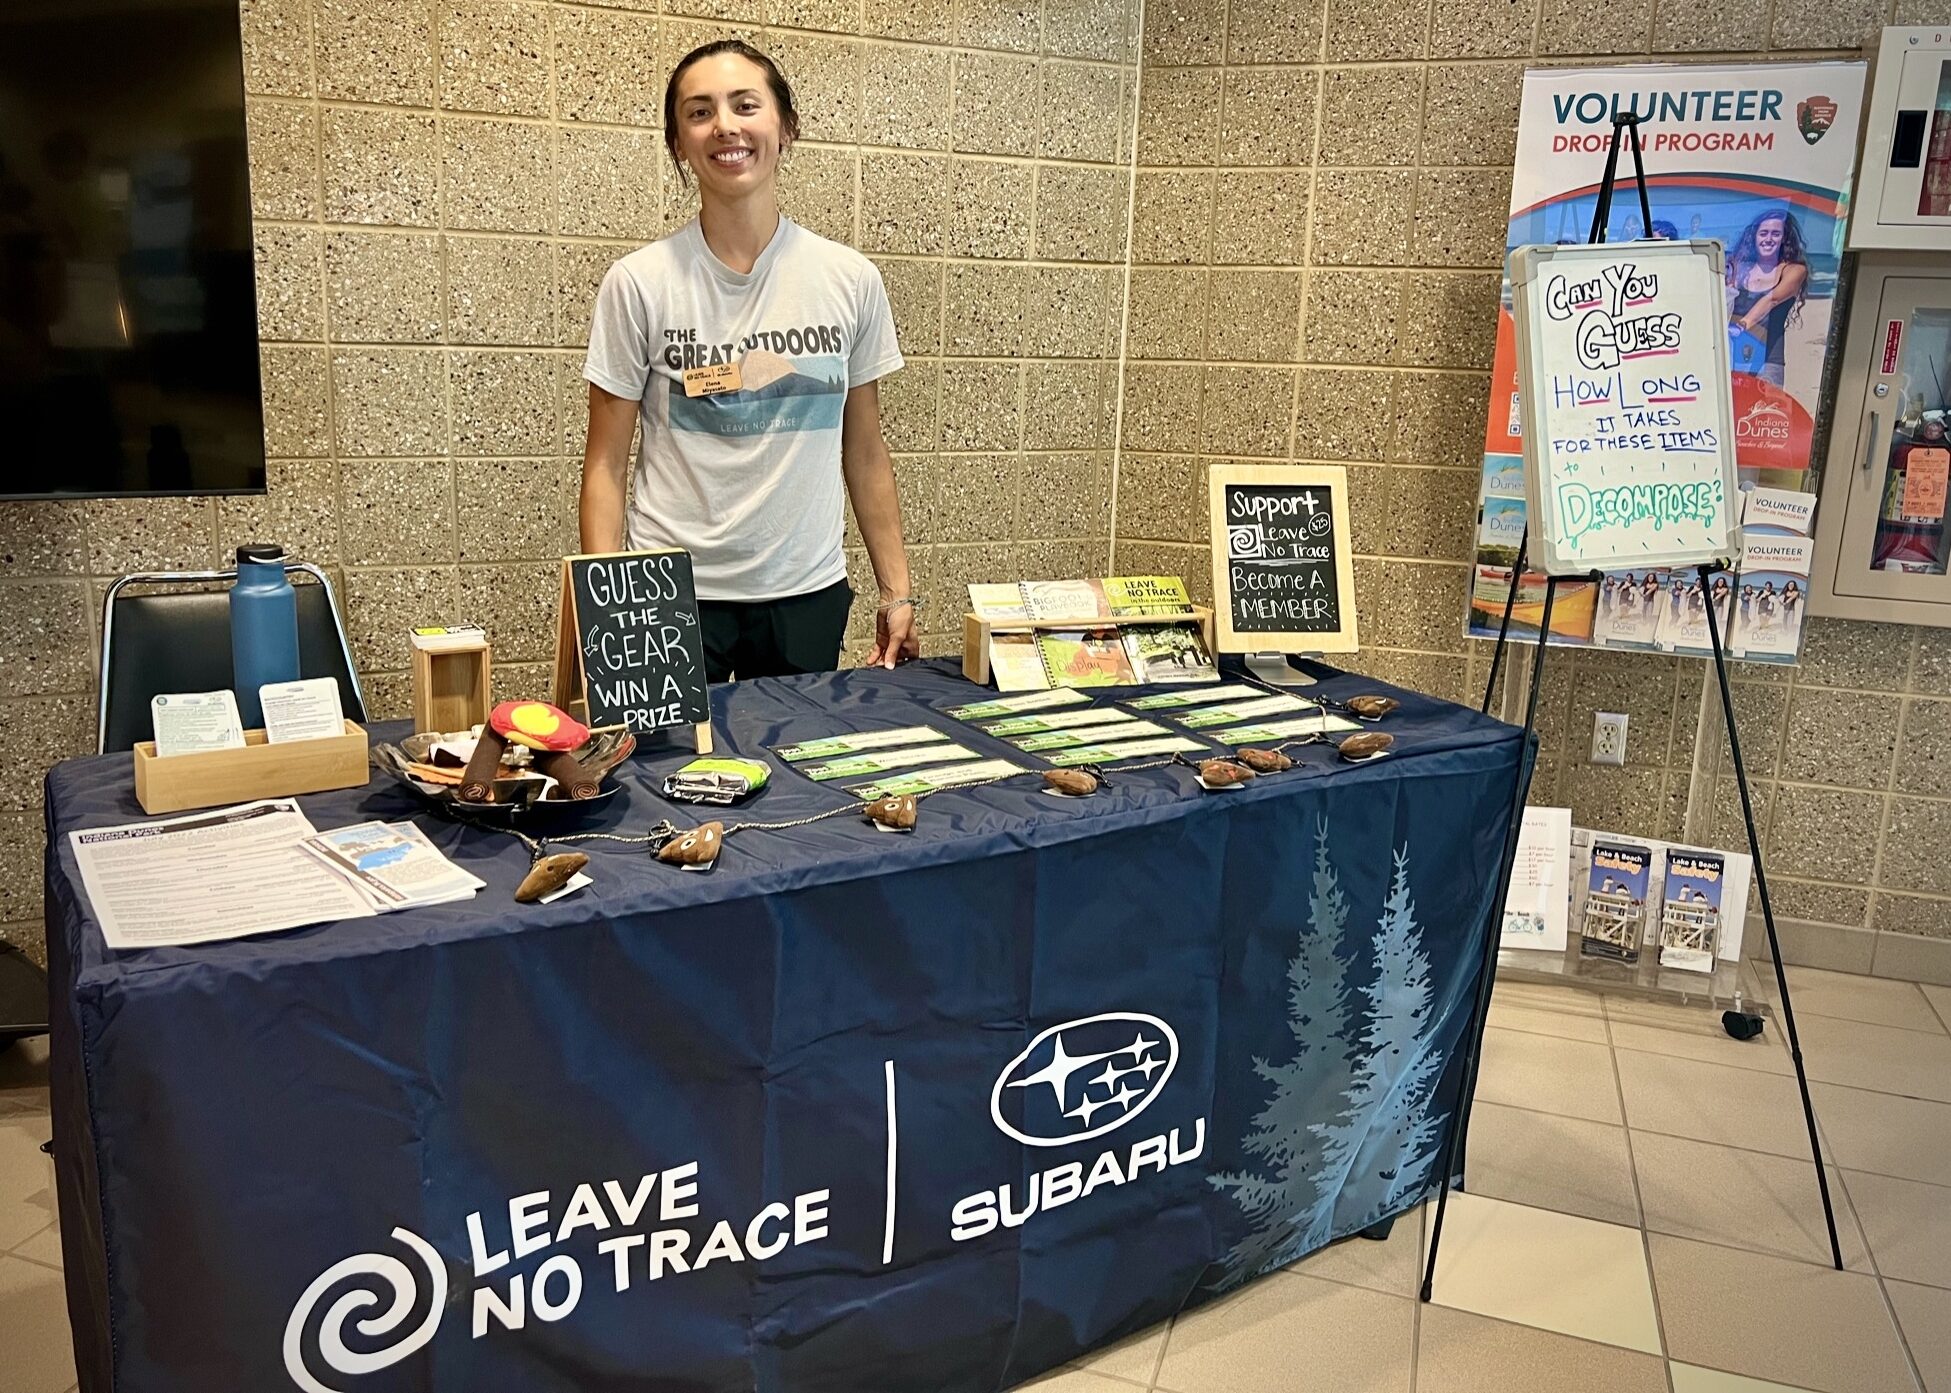 Leave No Trace educator standing behind an outreach table with games and resources set out on the table.